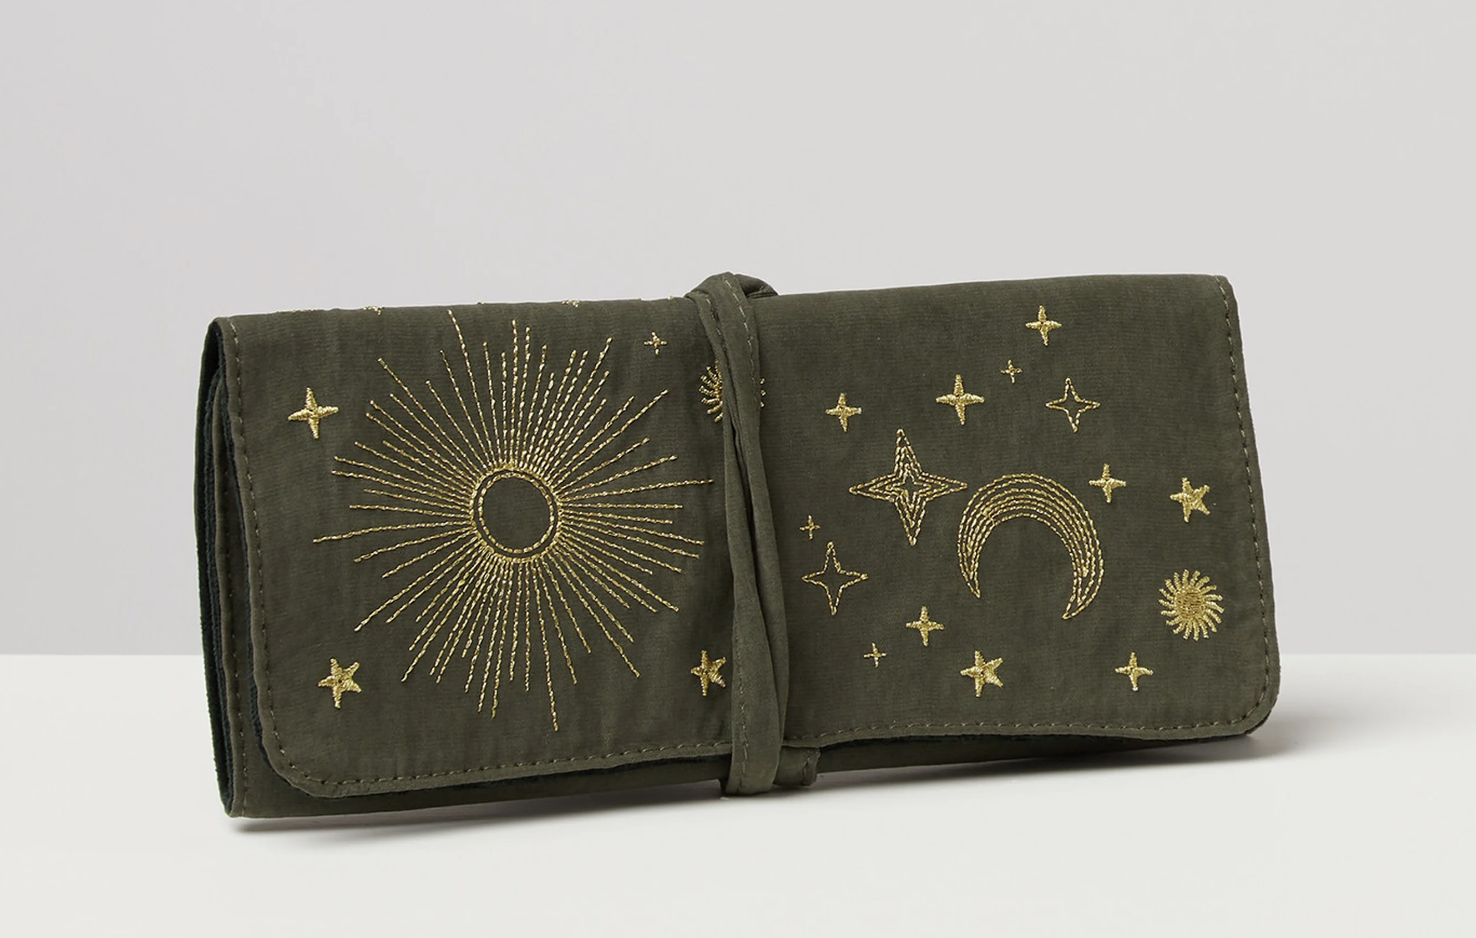 Embroidered star khaki jewellery roll from Oliver Bonas